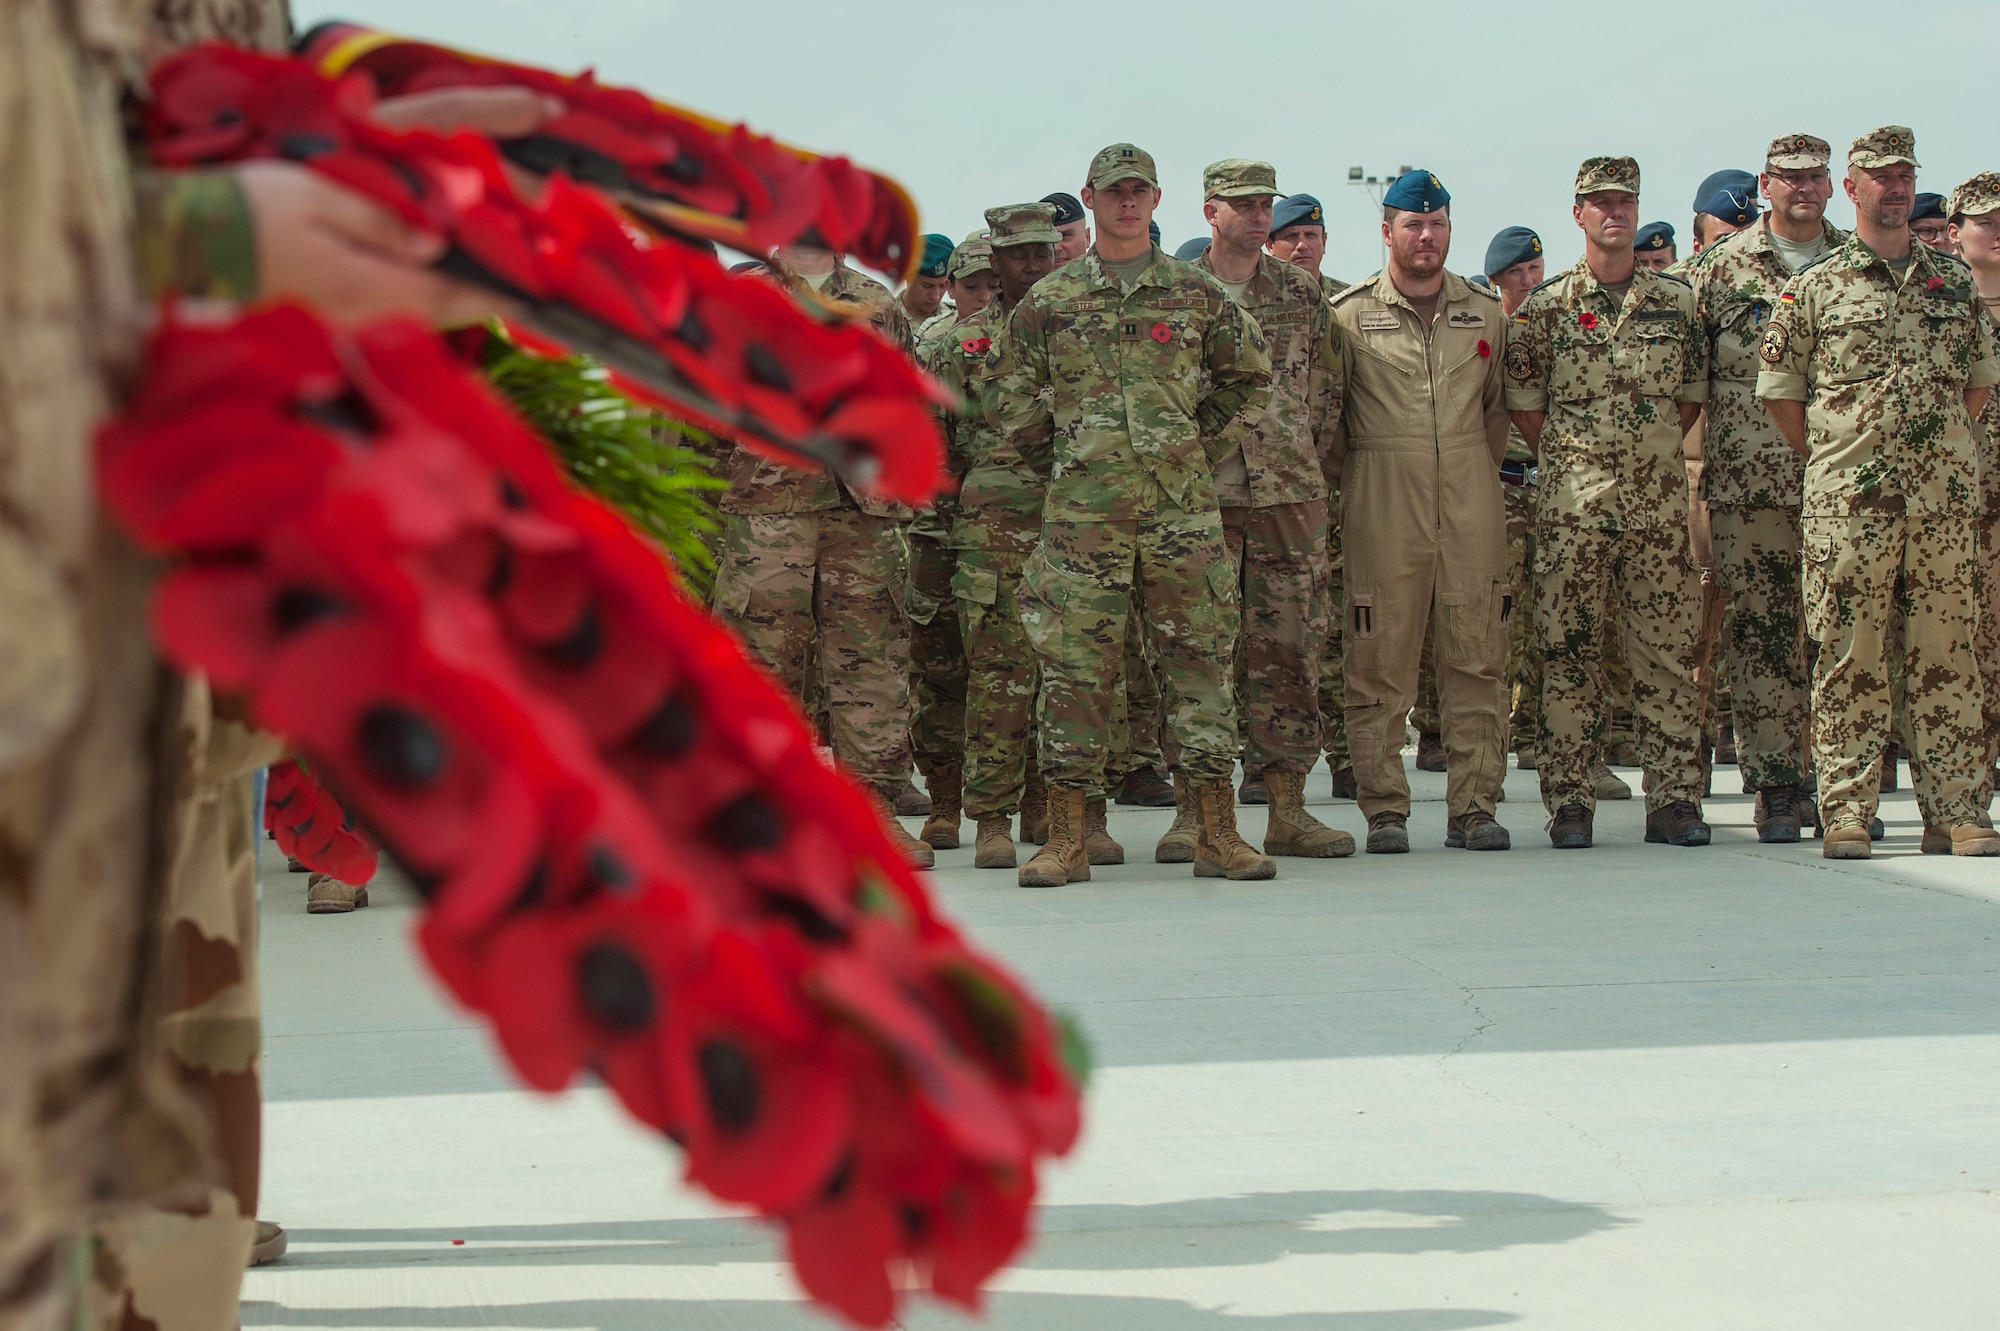 Service members stand in a multinational formation during a Service of Remembrance Nov. 11, 2018, at Al Udeid Air Base, Qatar. Members of the Royal Air Force hosted the event, organizing the involvement of 15 nations’ military members. The service marked 100 years since the end of World War I. (U.S. Air Force photo by Tech. Sgt. Christopher Hubenthal)